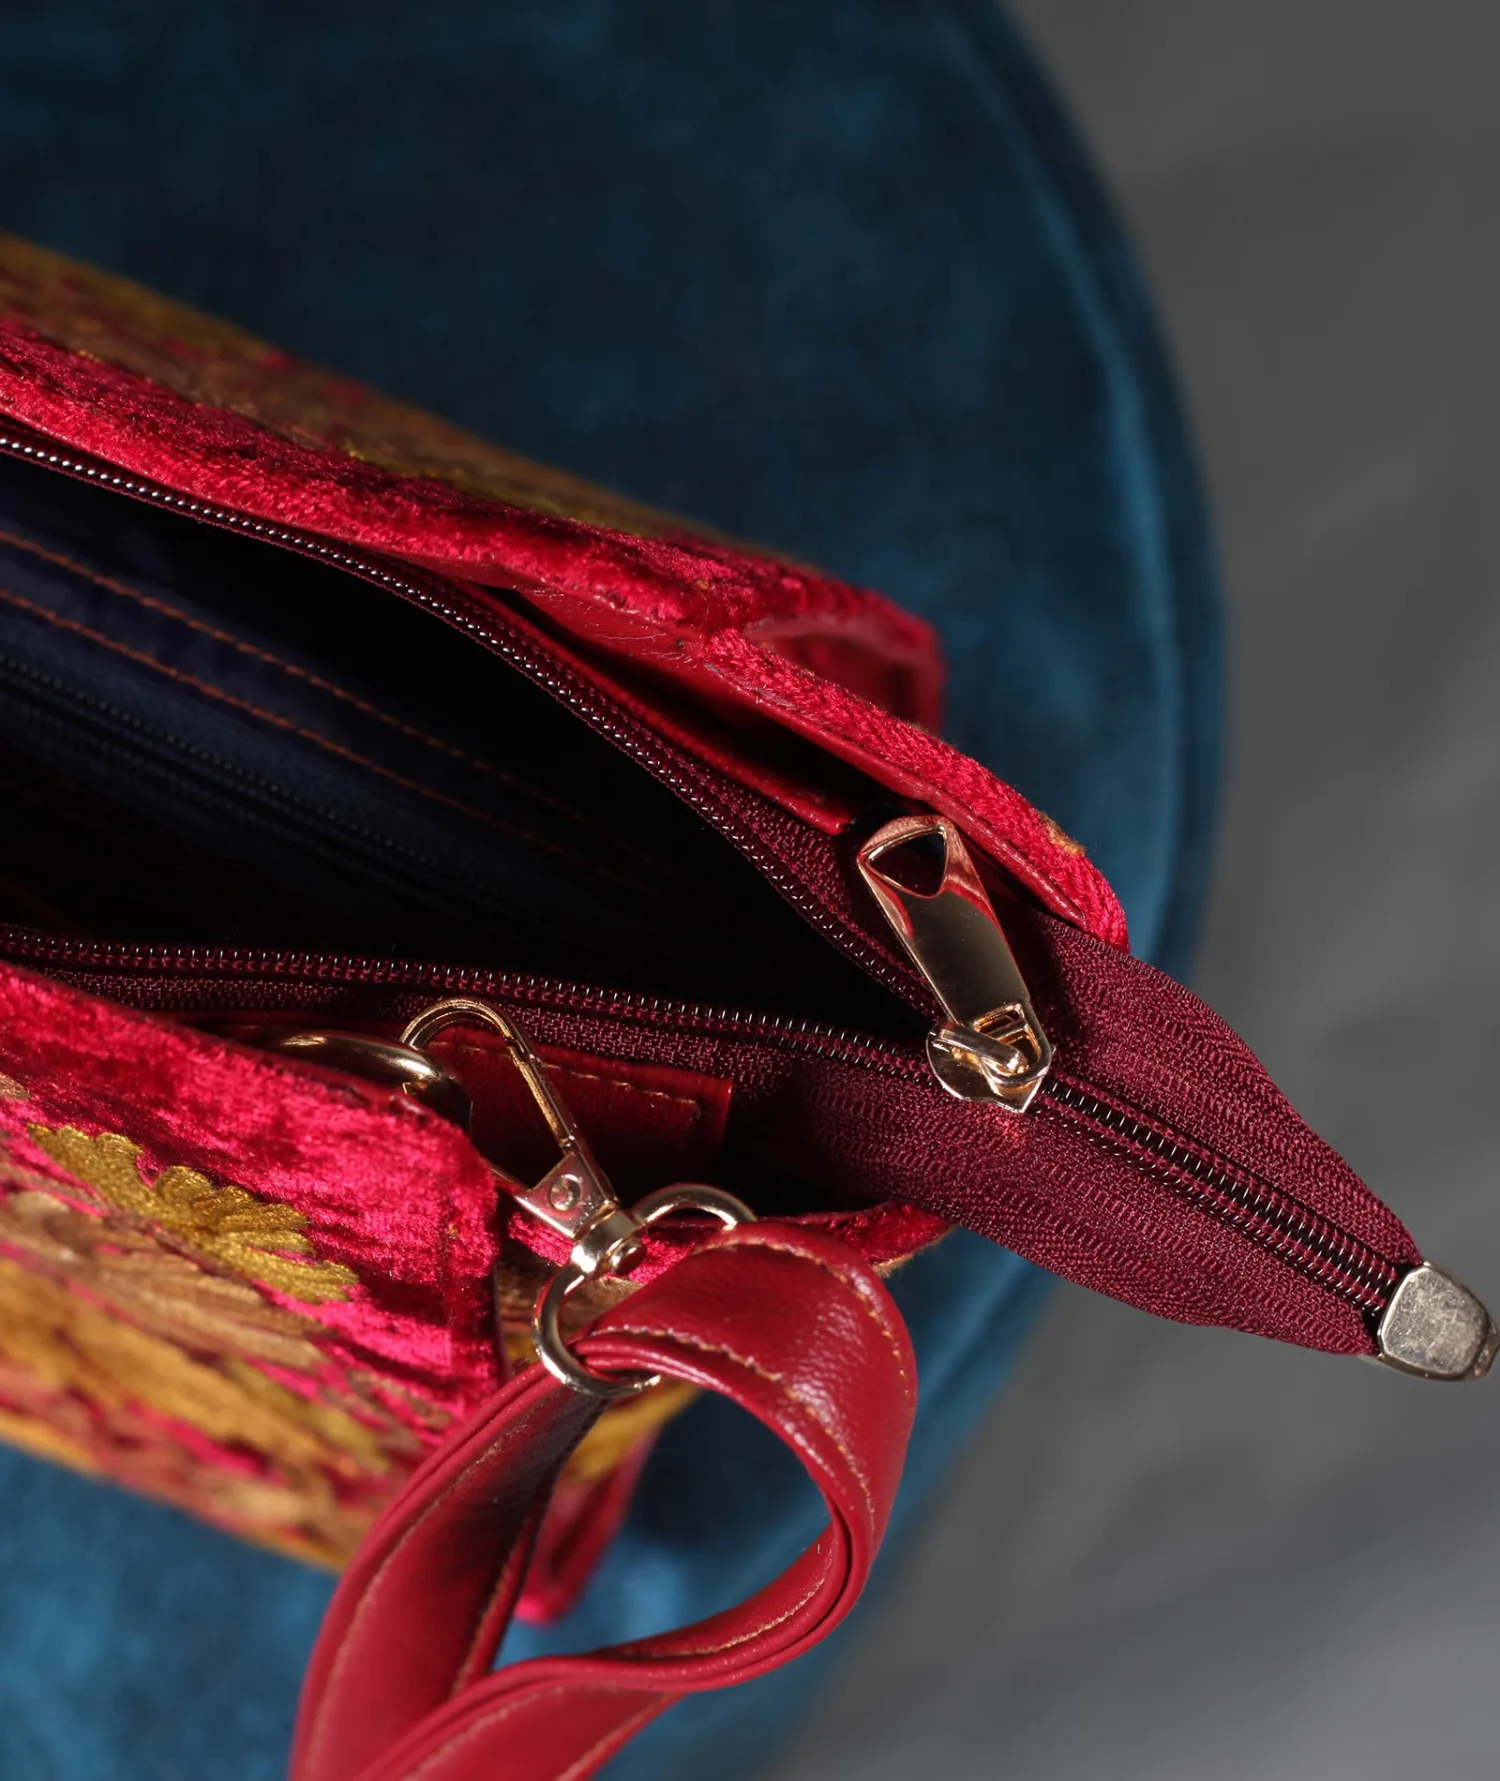 Chinar Design Aari Embroidered Red Hand Bag